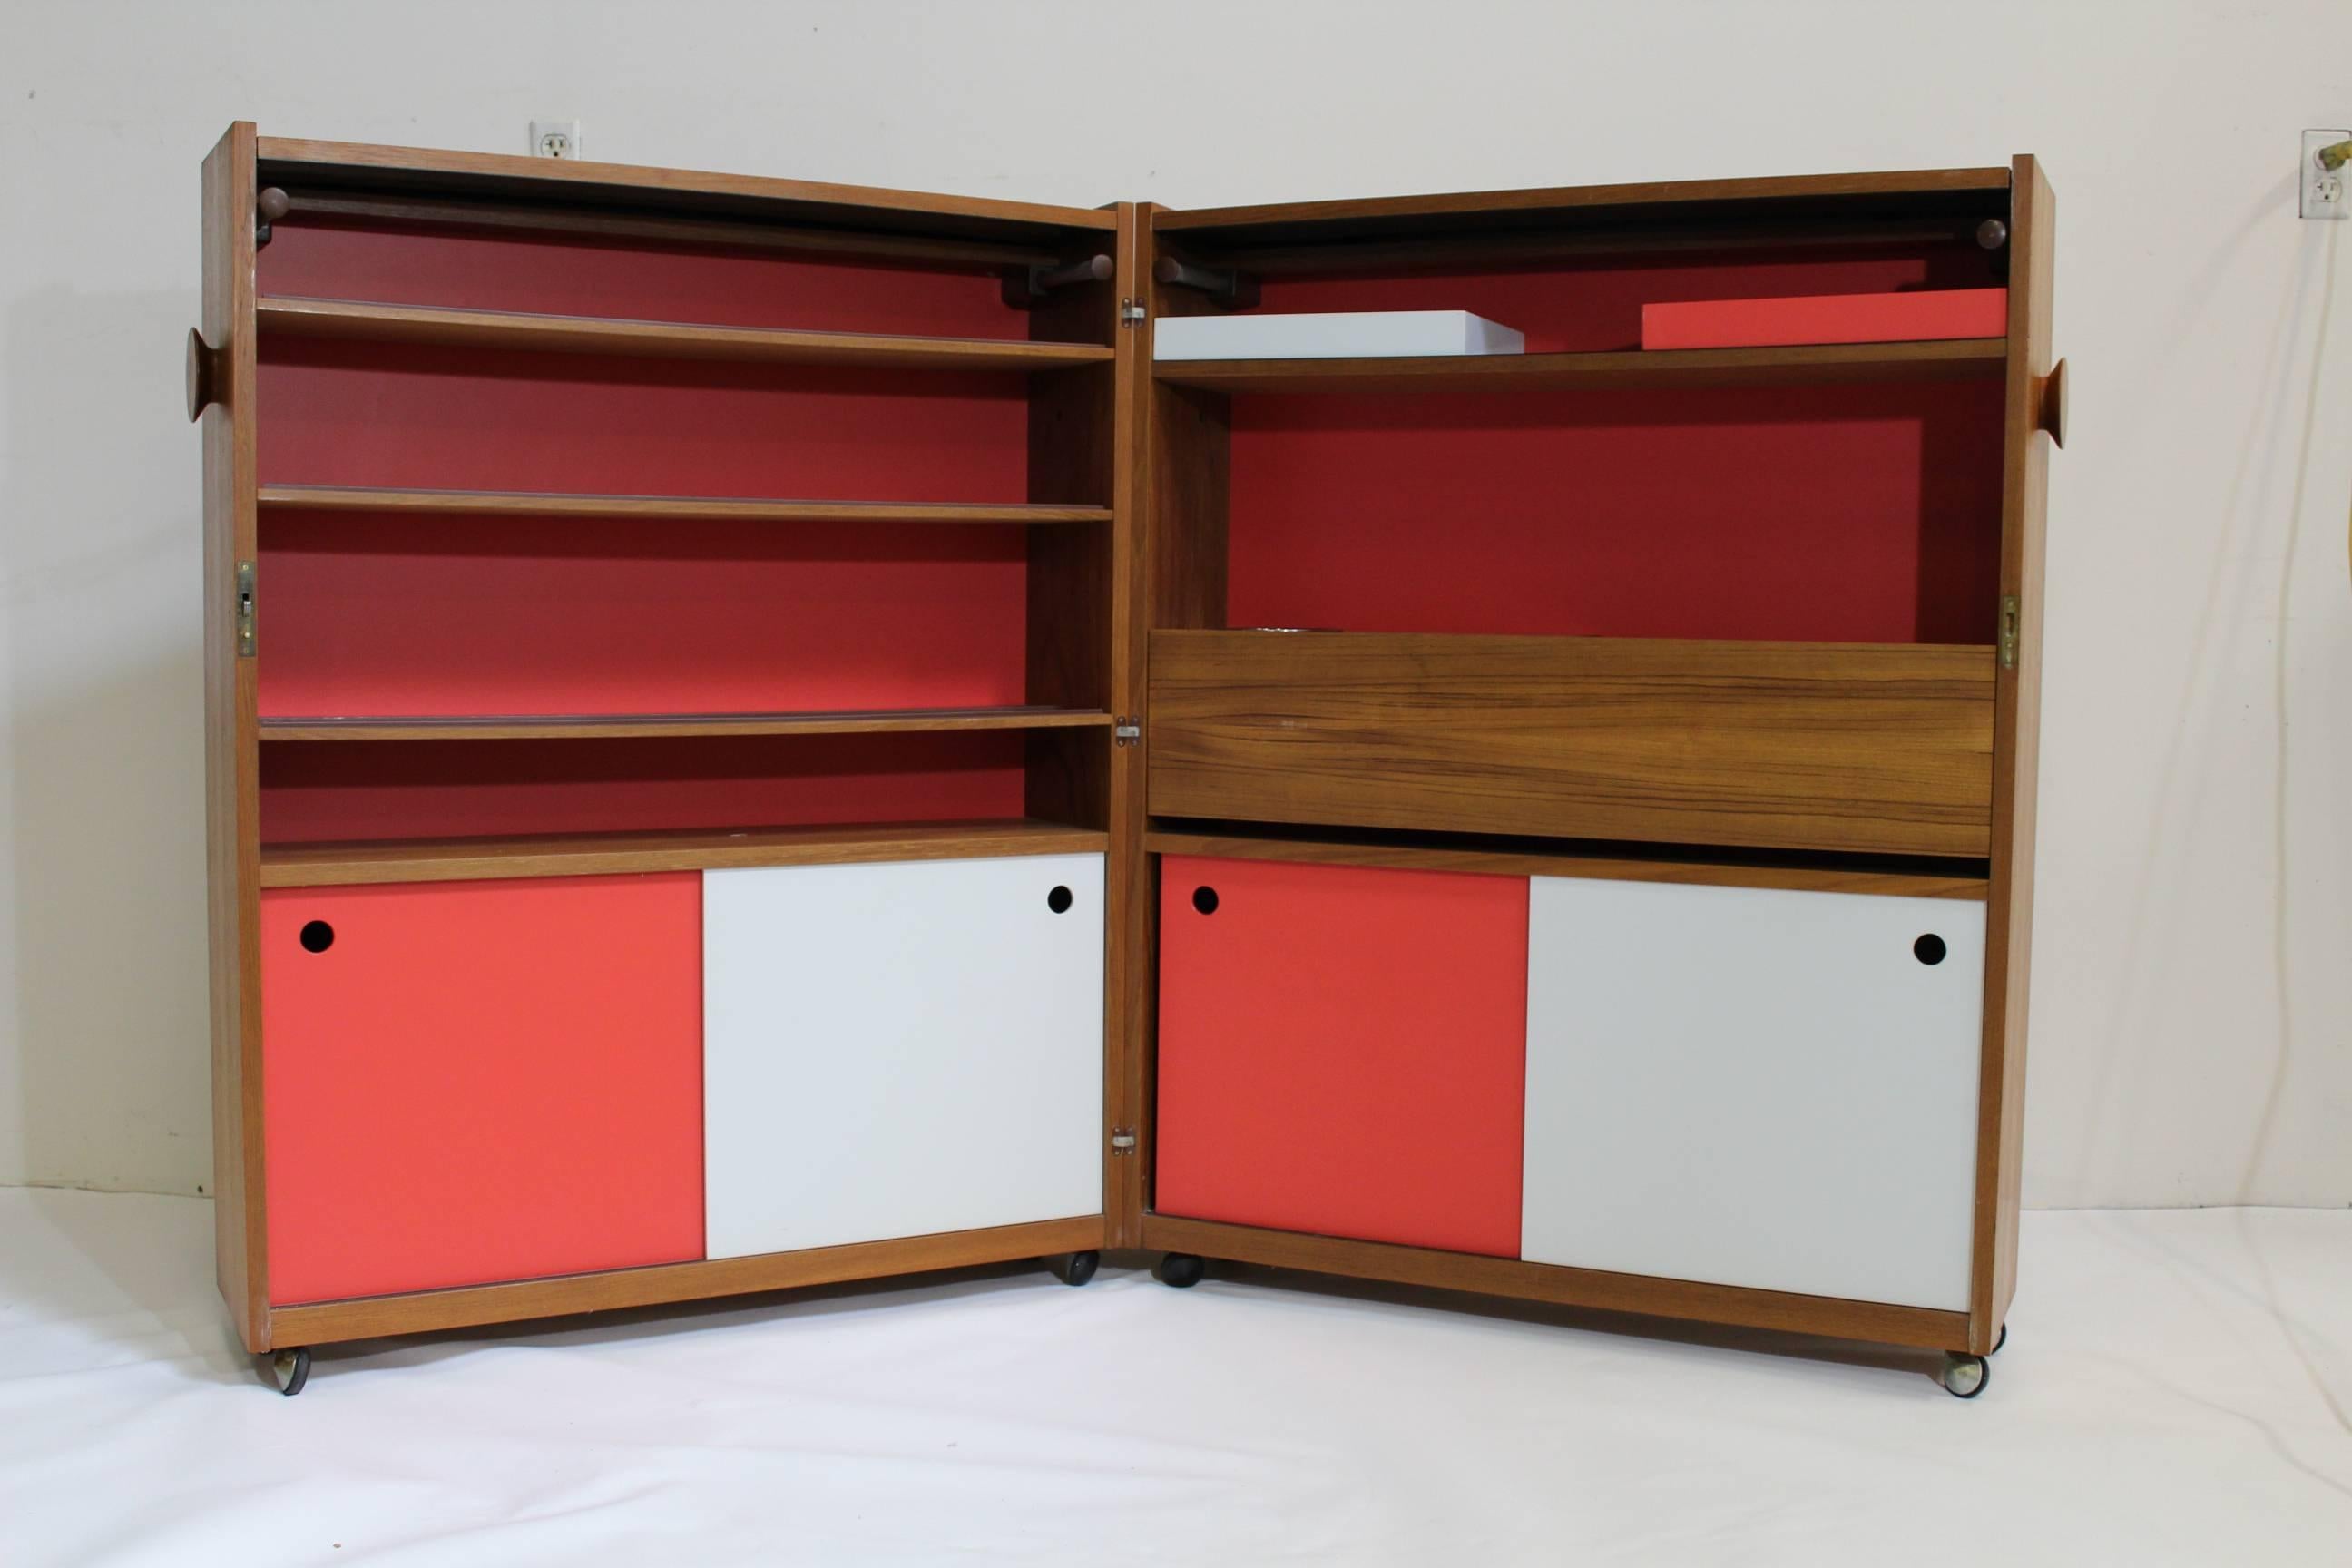 Vintage 1960s teak bar by Danish designer Erik Buch, opens up to reveal various compartments and storage shelves but can be closed to fit into a small space. The top flips up to reveal an extendable countertop for more of a bar feel. The teak has